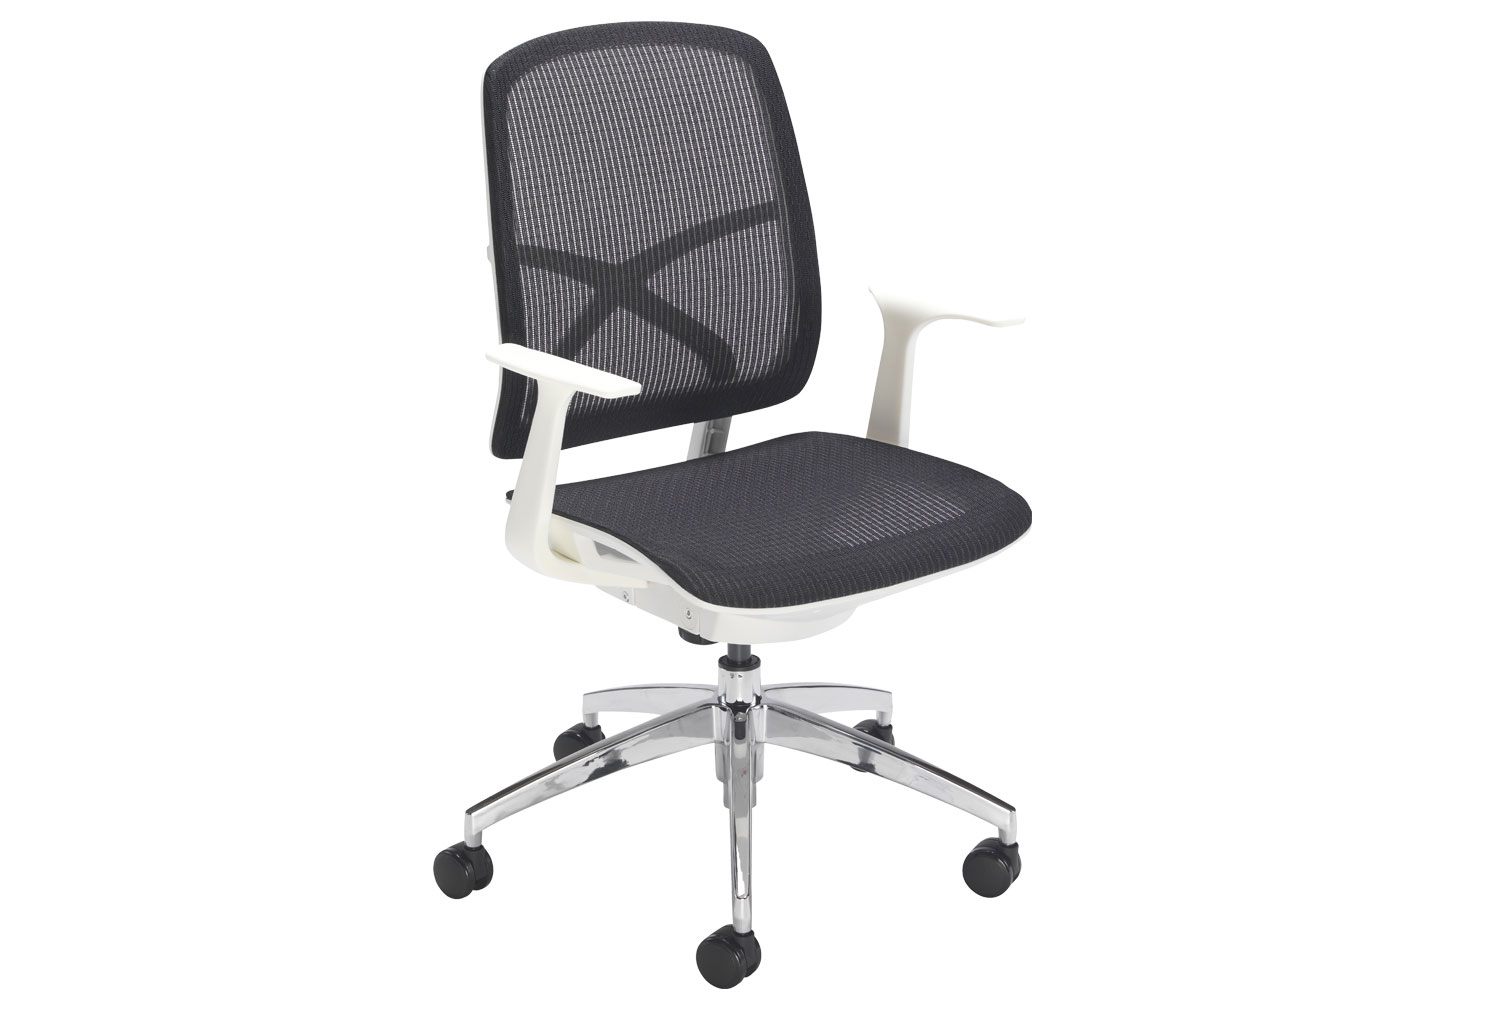 Kappen Mesh Back Operator Office Chair, Black, Express Delivery